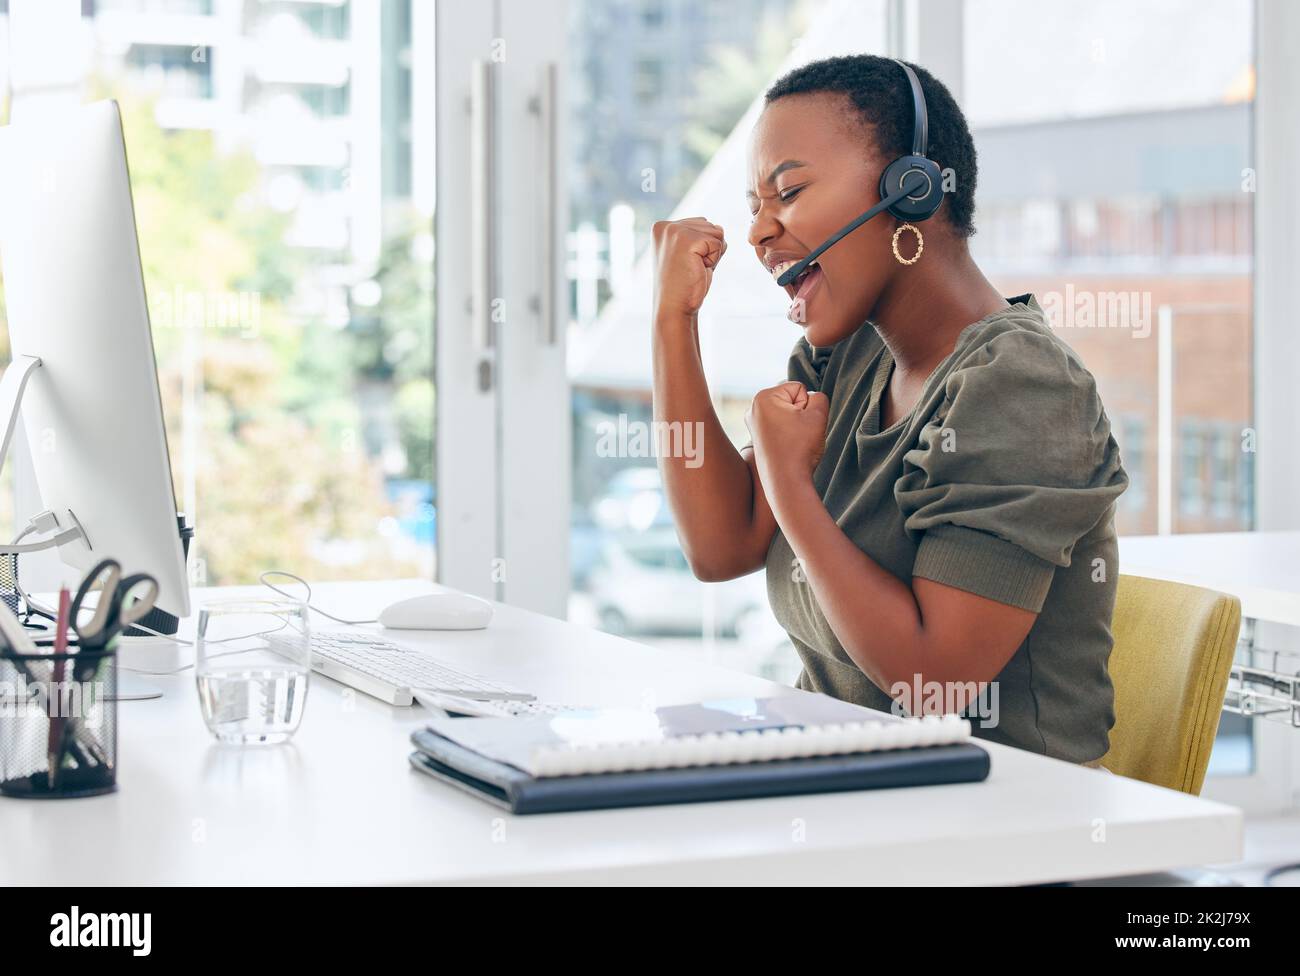 A good sale puts me in a good mood. Shot of a businesswoman looking cheerful while working in a call centre. Stock Photo